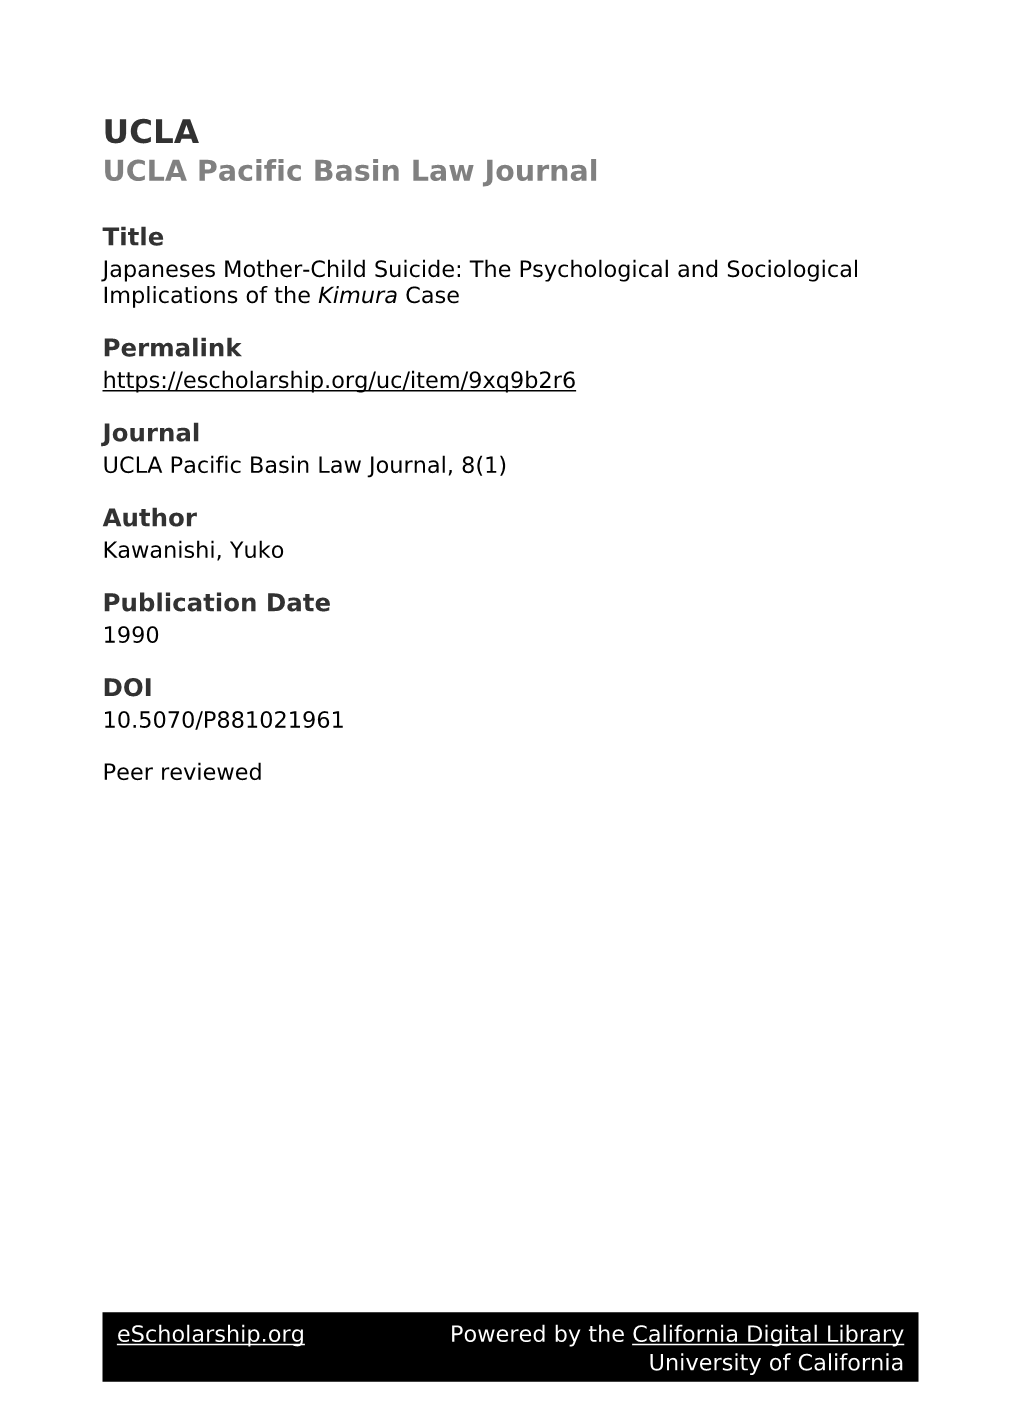 Japaneses Mother-Child Suicide: the Psychological and Sociological Implications of the Kimura Case